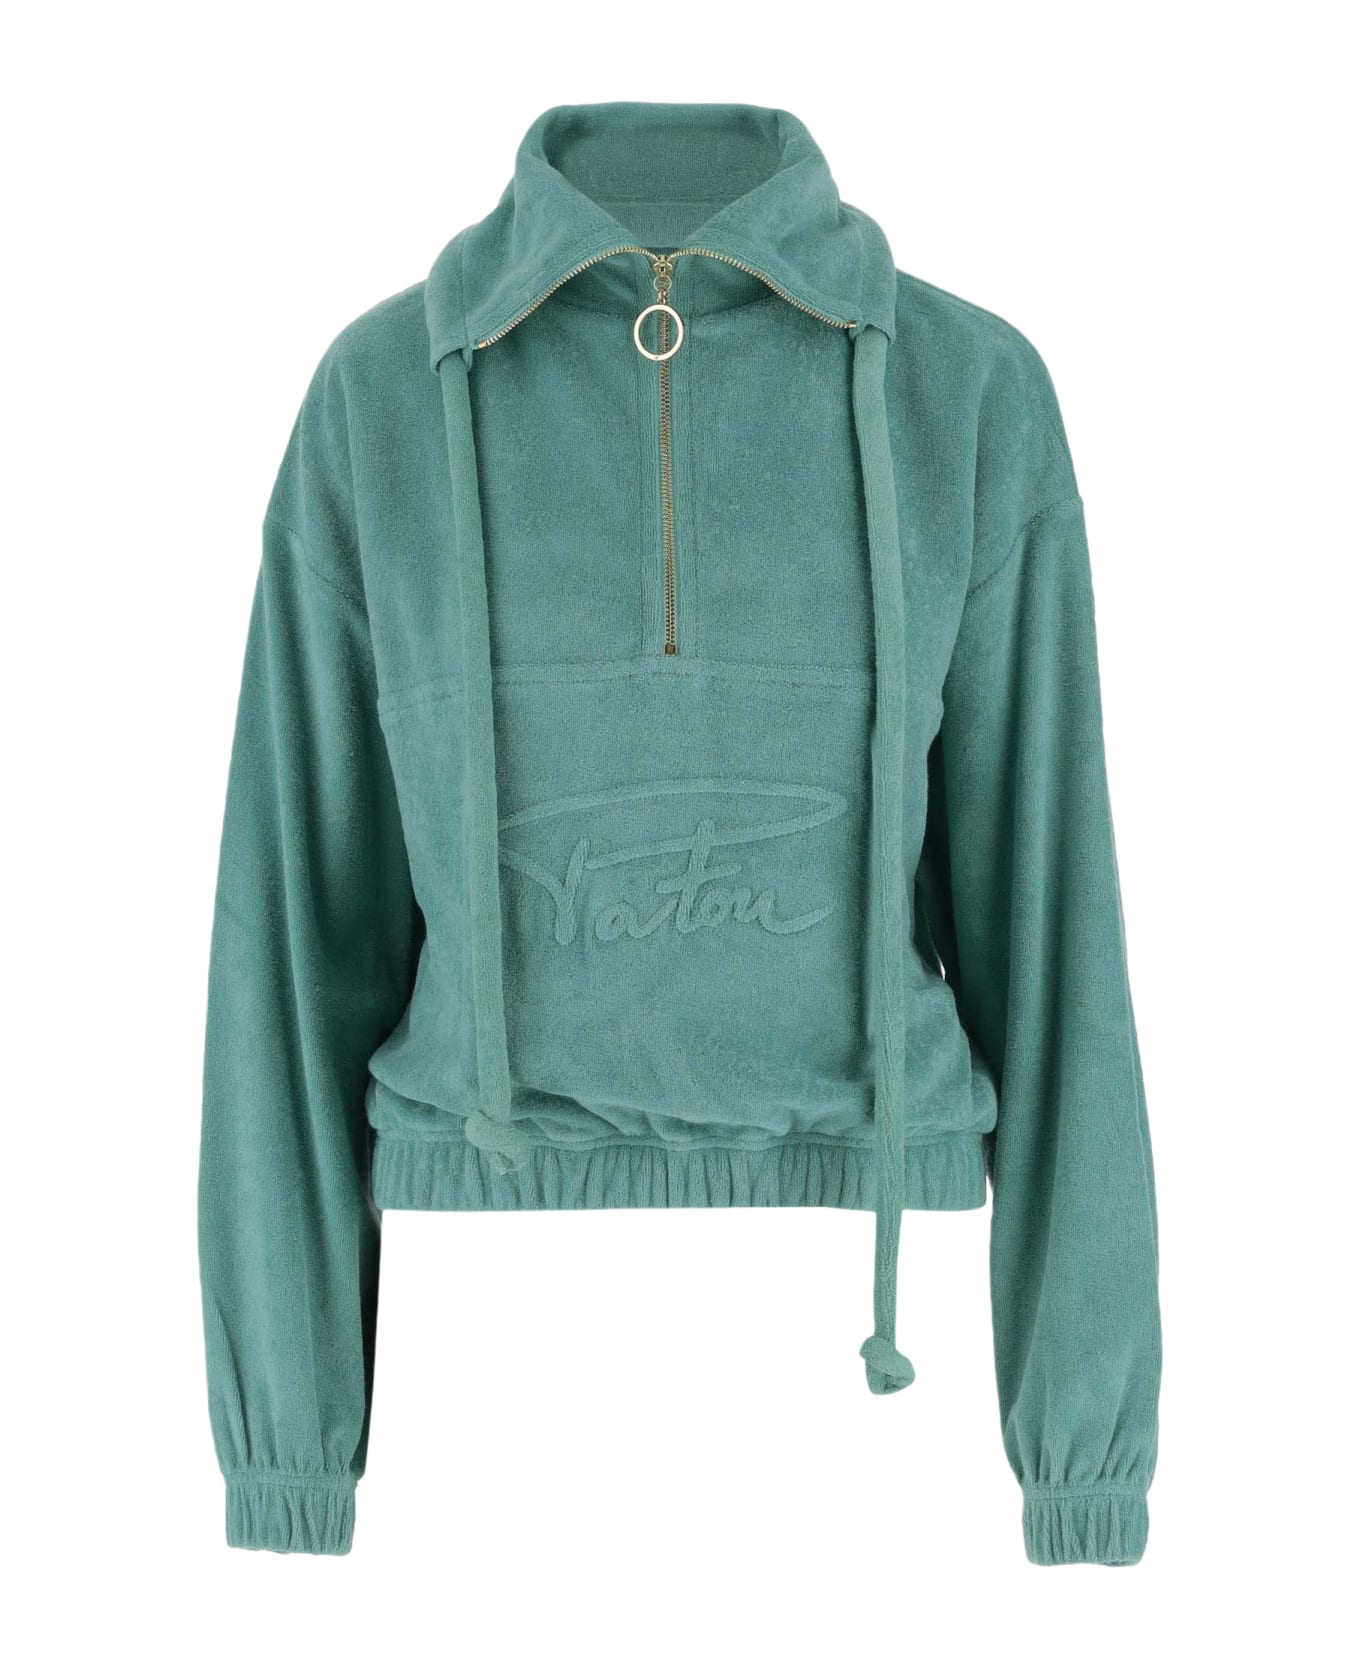 Patou Cotton Sweatshirt With Embossed Patou Signature - Green ニットウェア